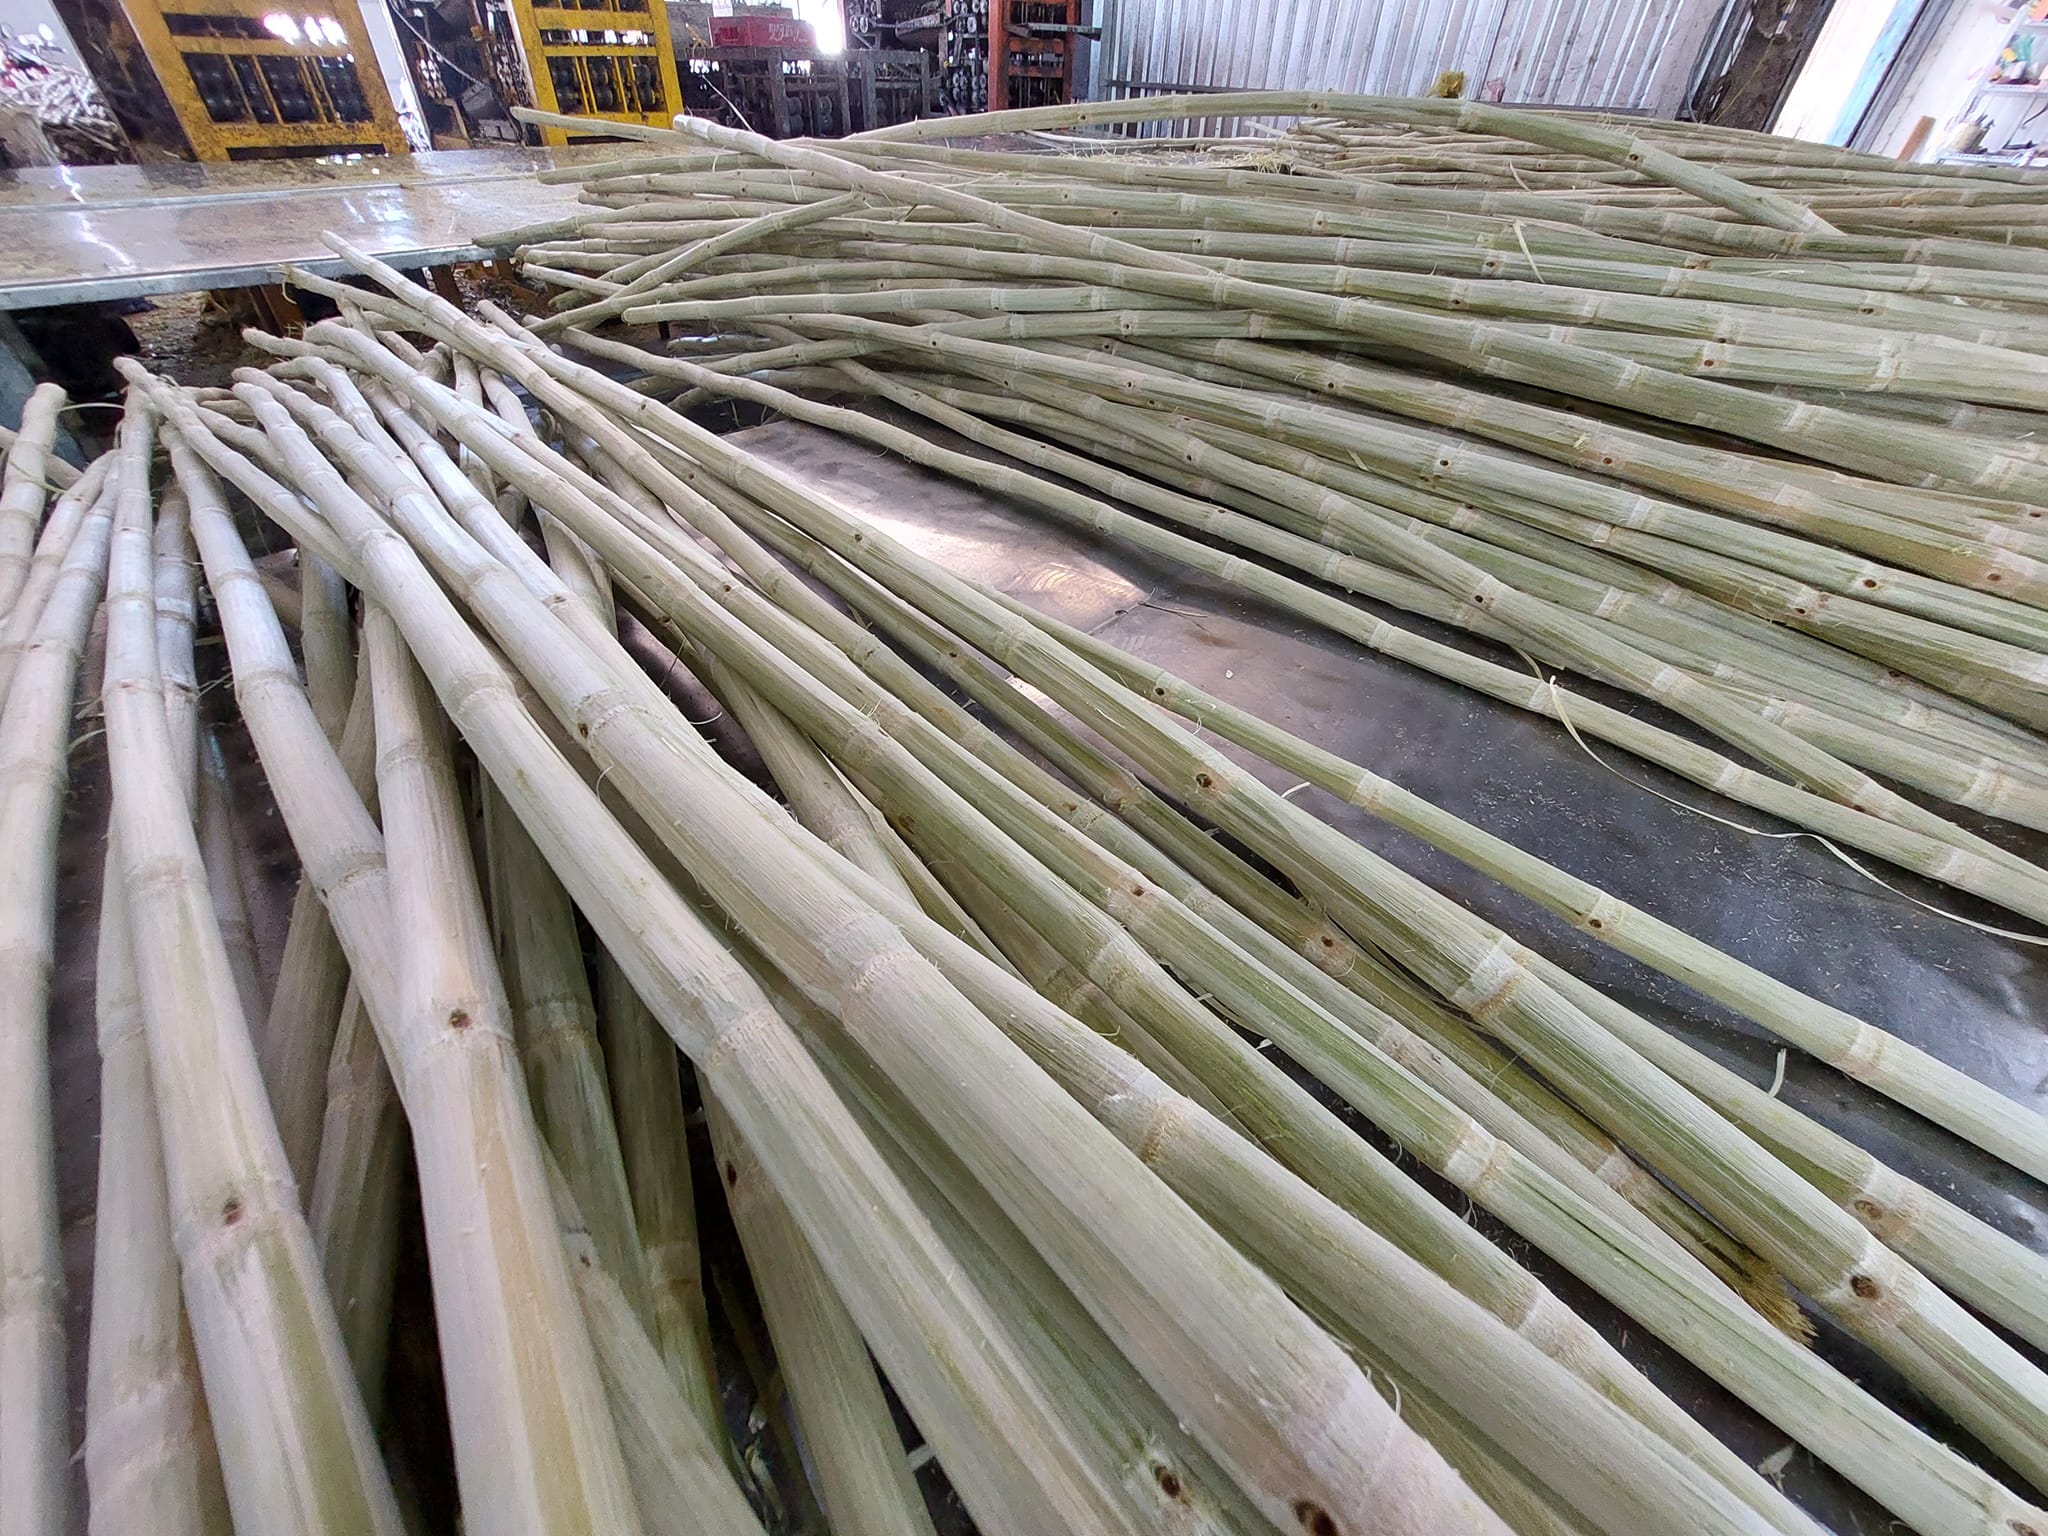 Tan Gia Thanh is one of reputable manufacturers that specilizes in producing and supplying frozen sugarcane sticks in Vietnam